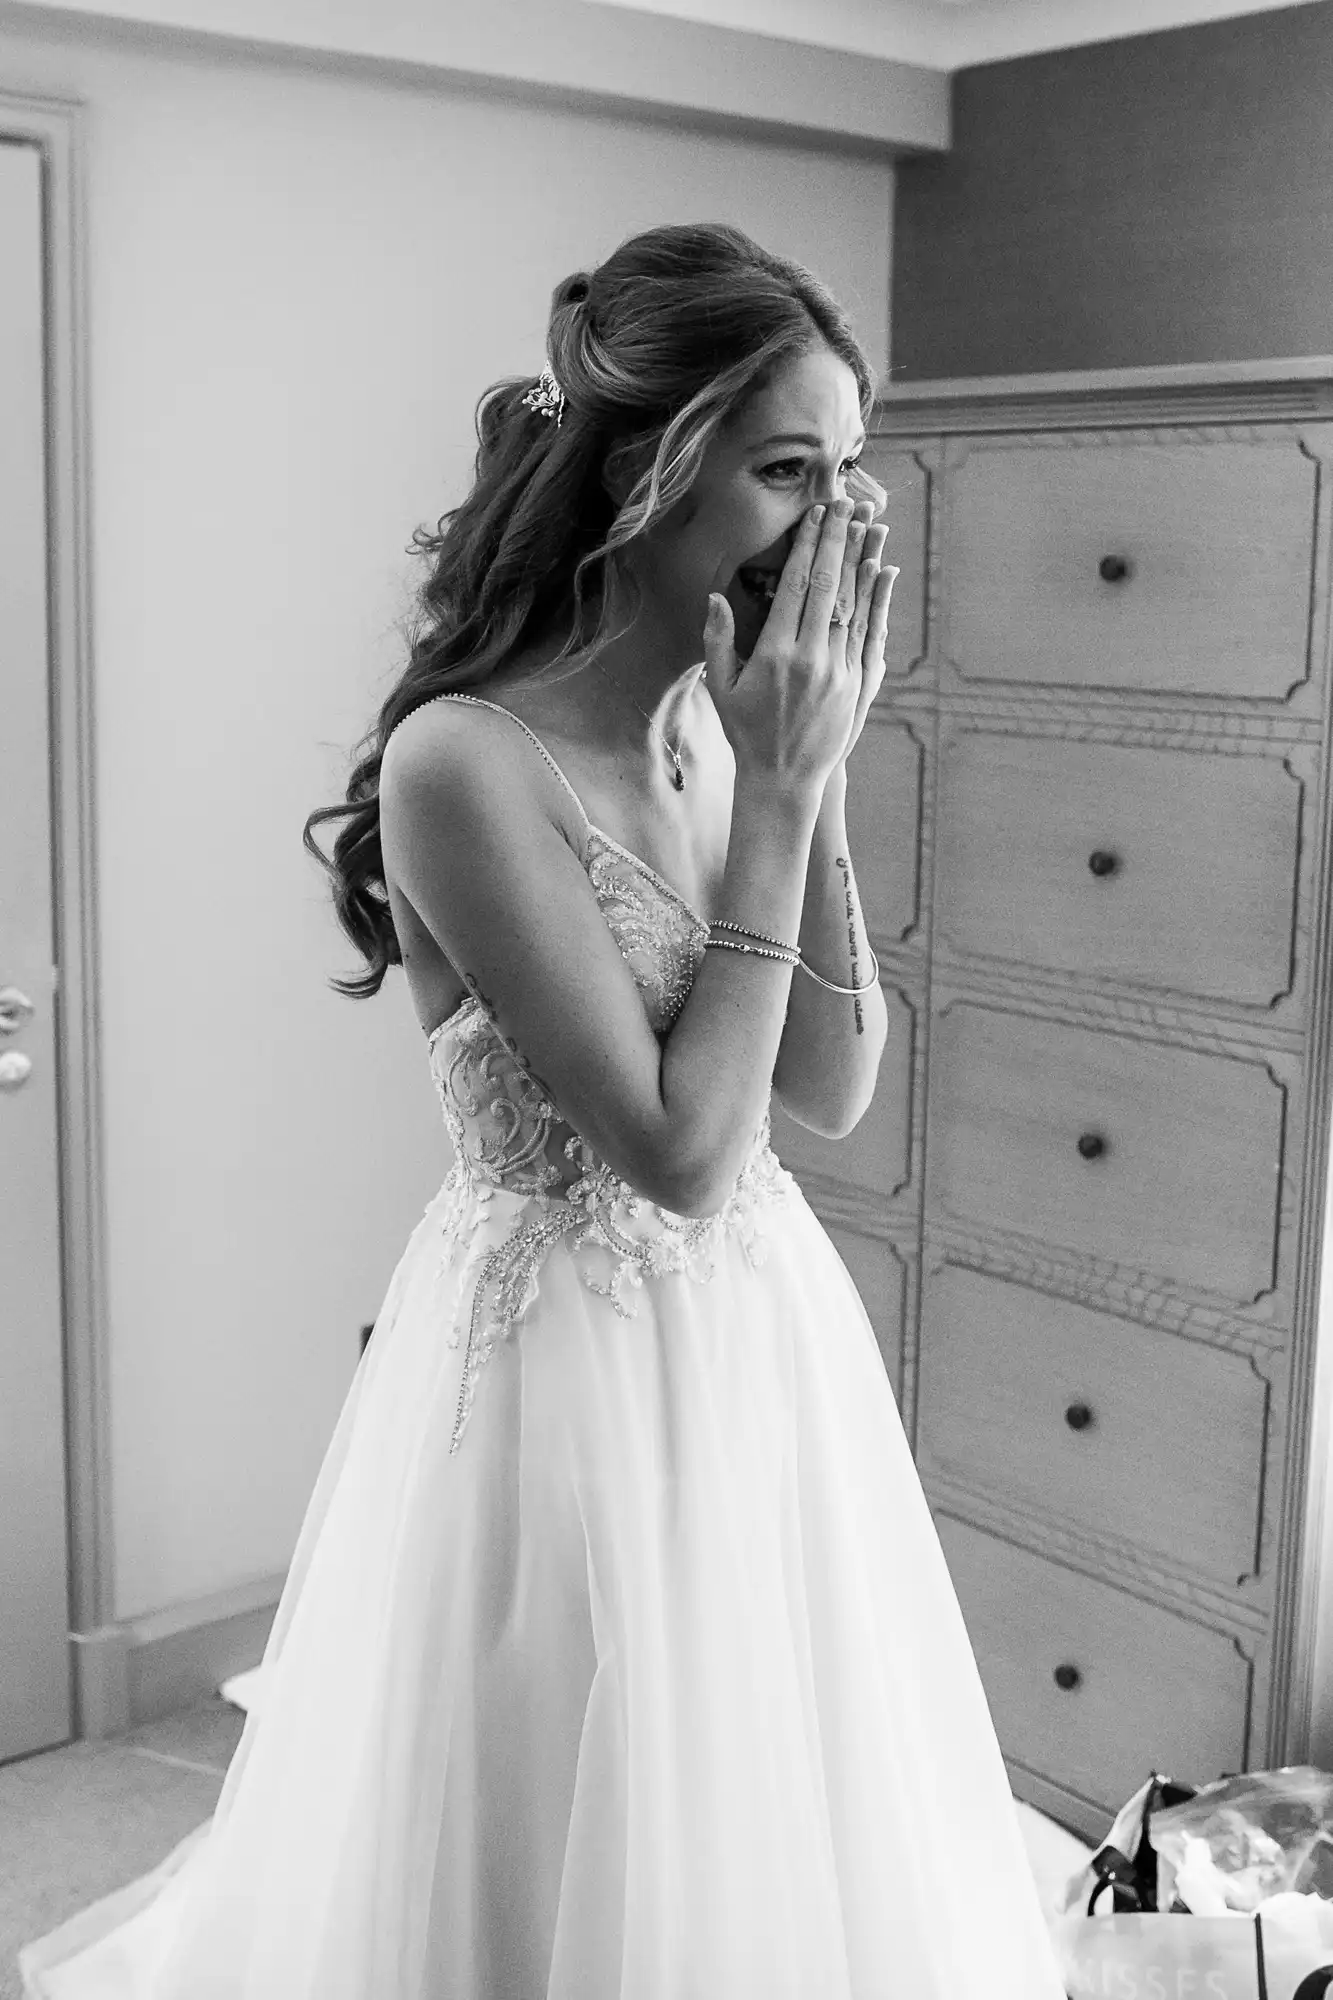 A woman in a white wedding dress stands indoors with hands covering her mouth, appearing emotional.